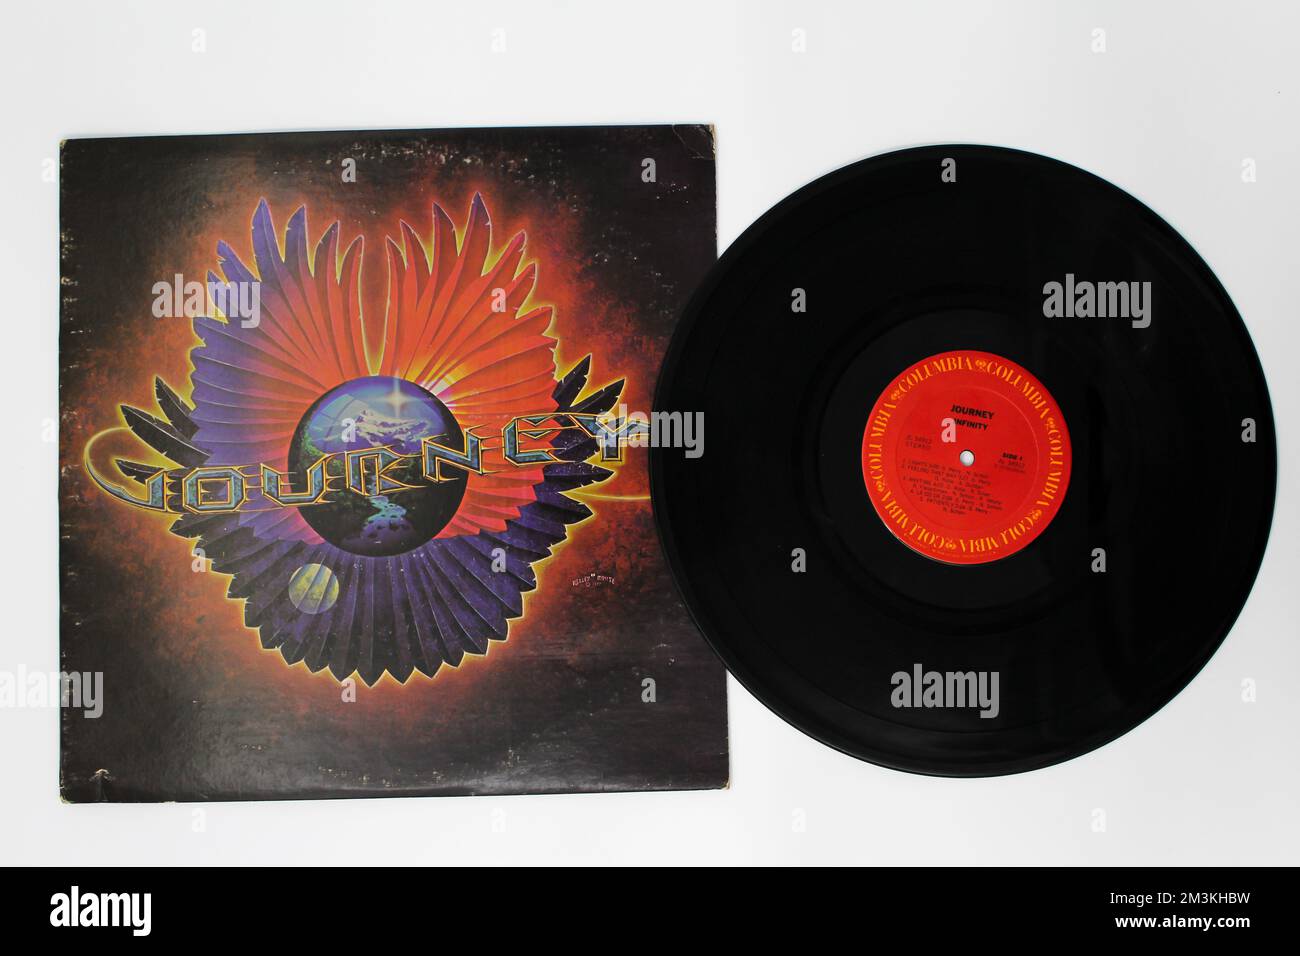 Hard rock and soft rock band,  Journey band music album on vinyl record LP disc. Titled: Infinity album cover Stock Photo